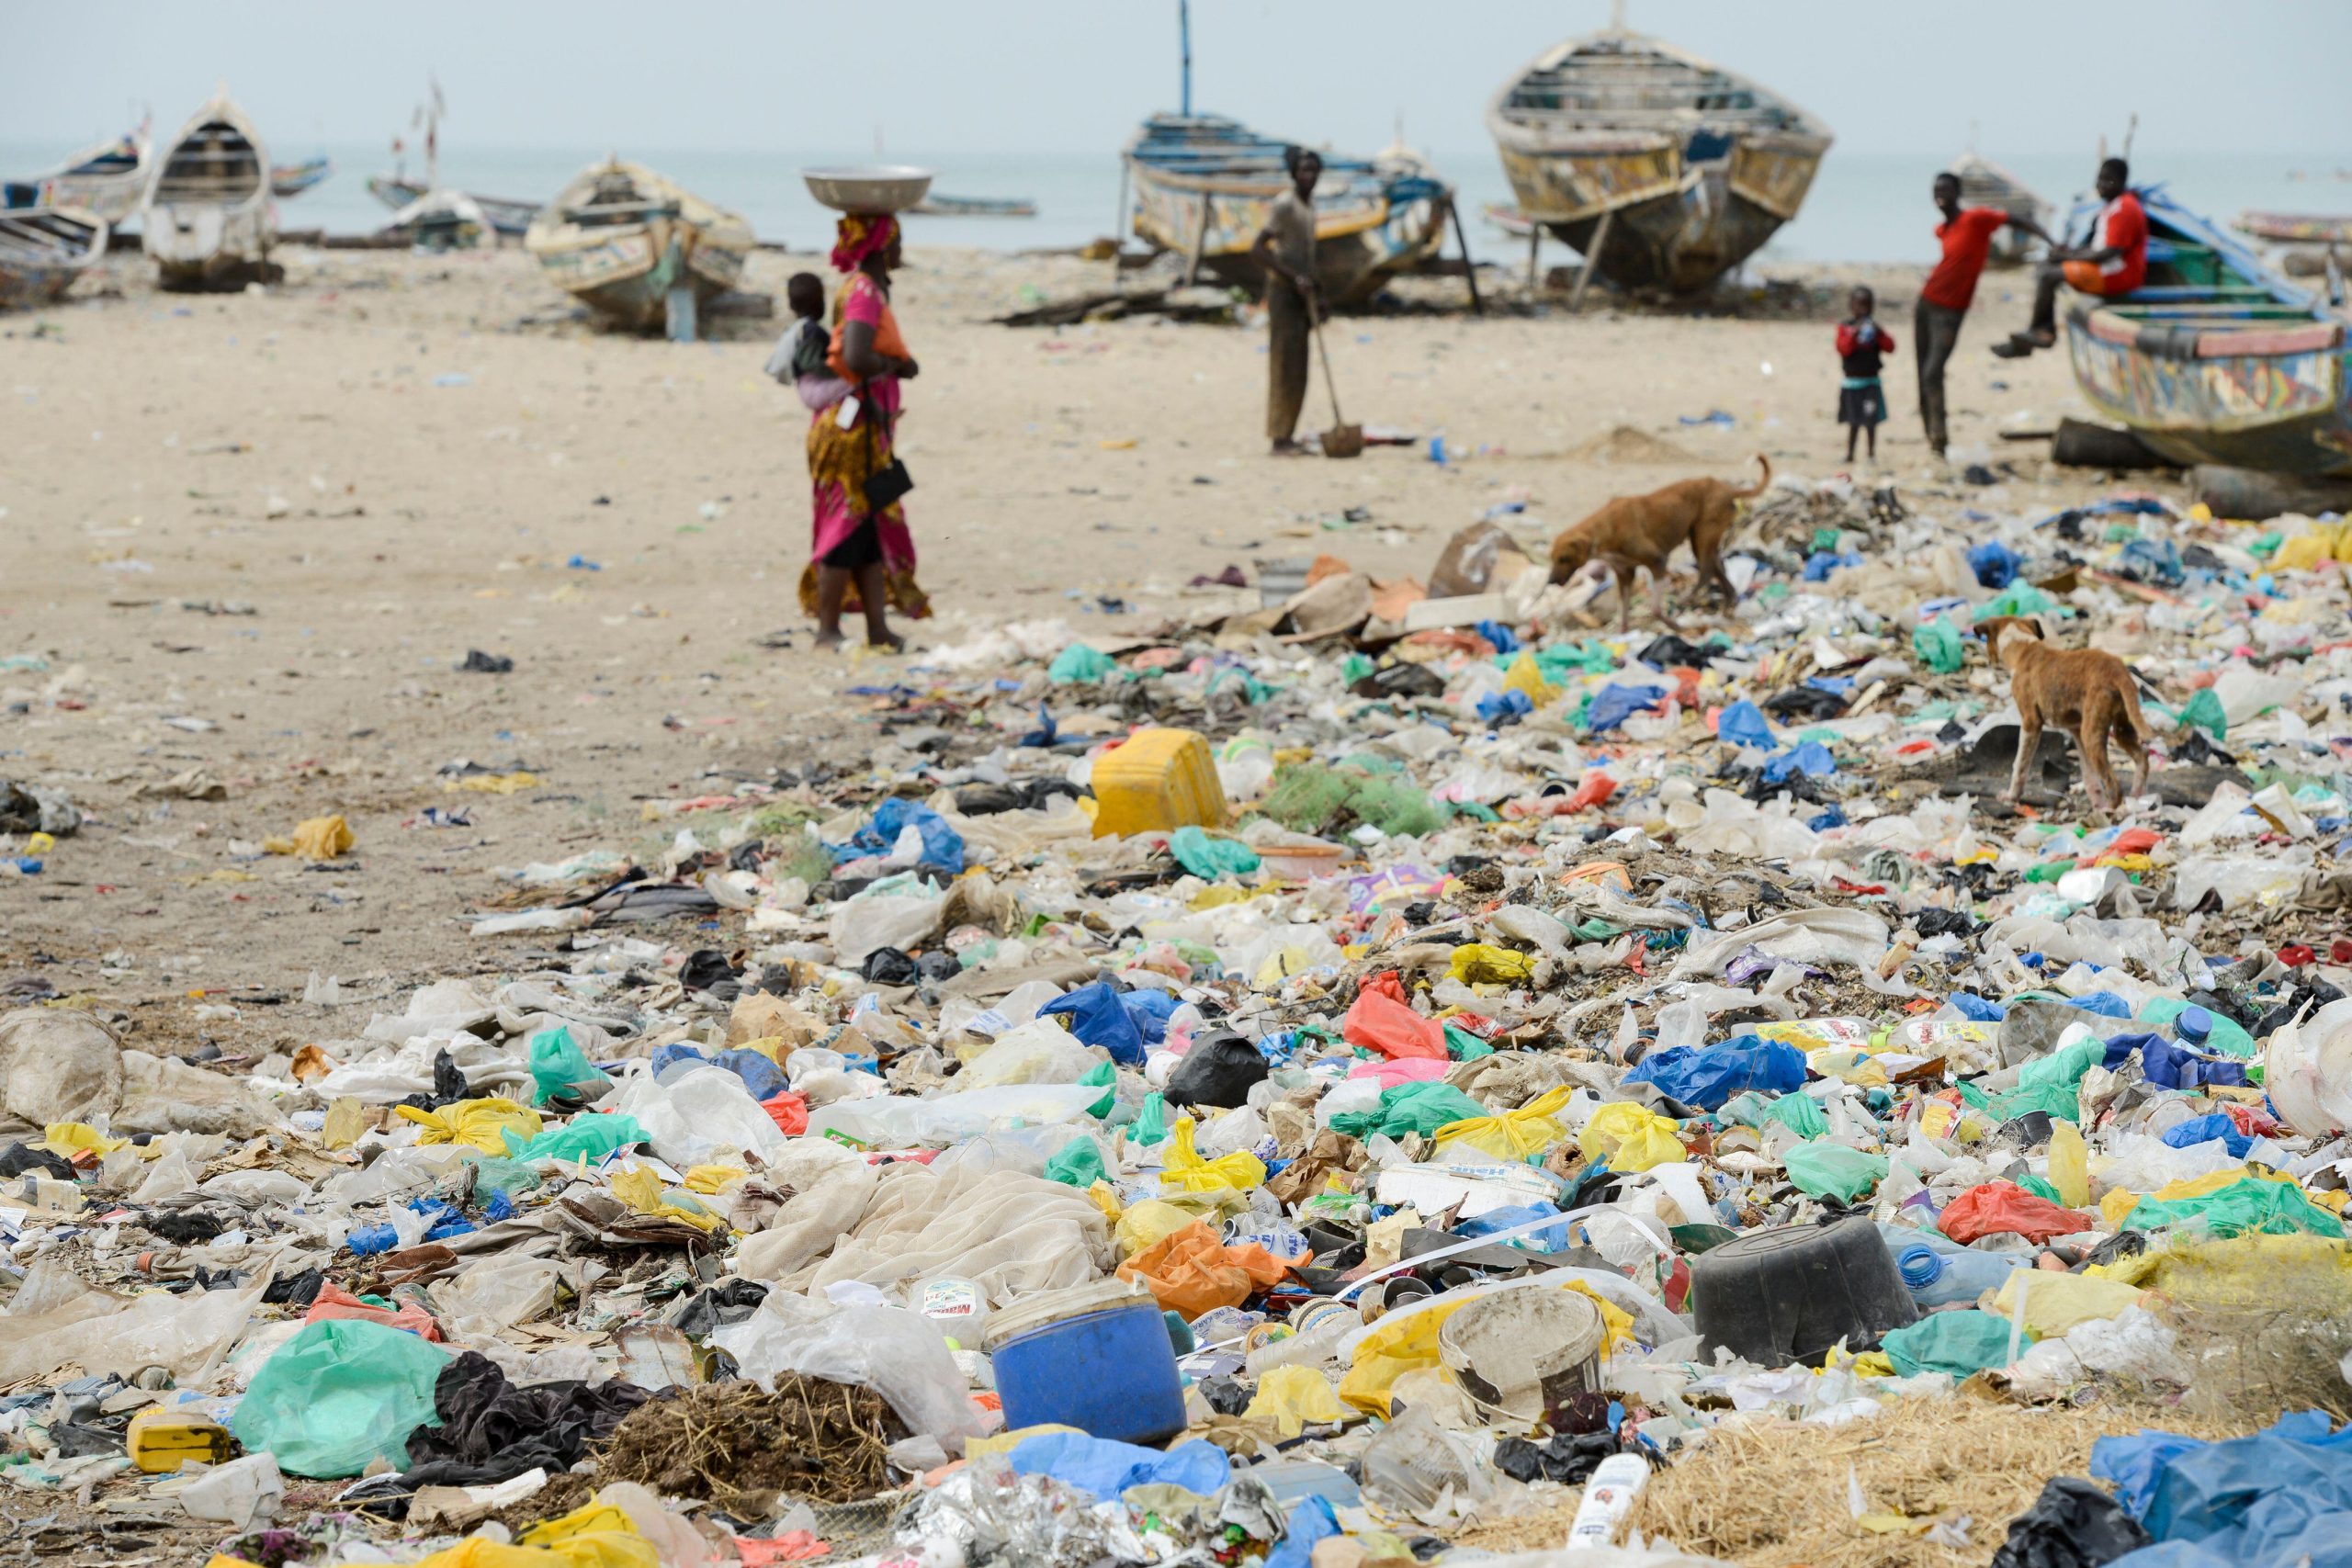 <p>A group of fishers on a highly polluted beach in Senegal, West Africa (Image: Joerg Boethling / Alamy)</p>